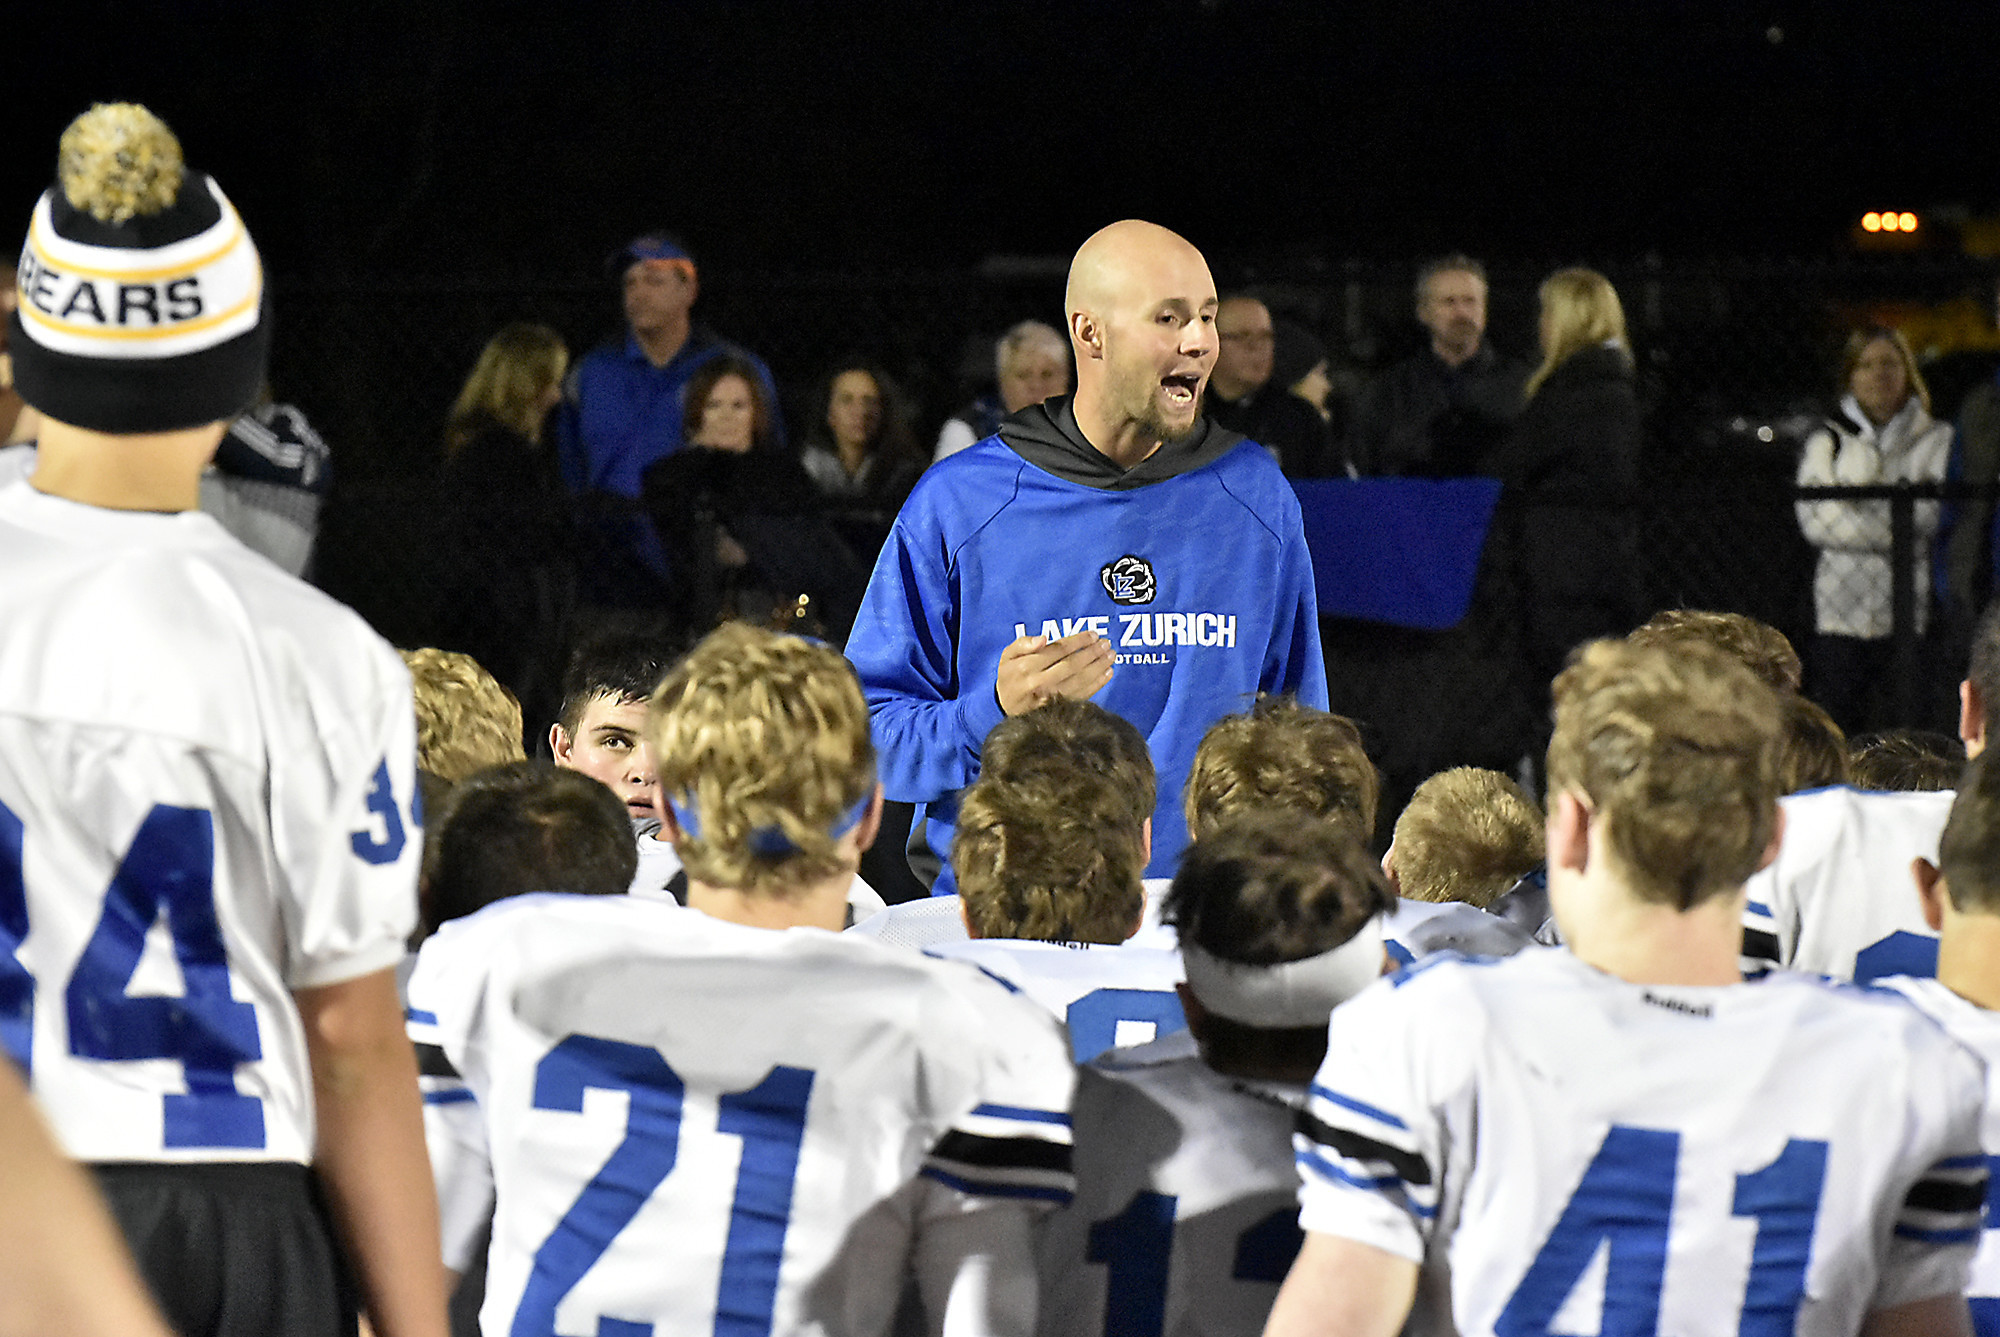 Lake Zurich police: No charges in locker room hazing investigation